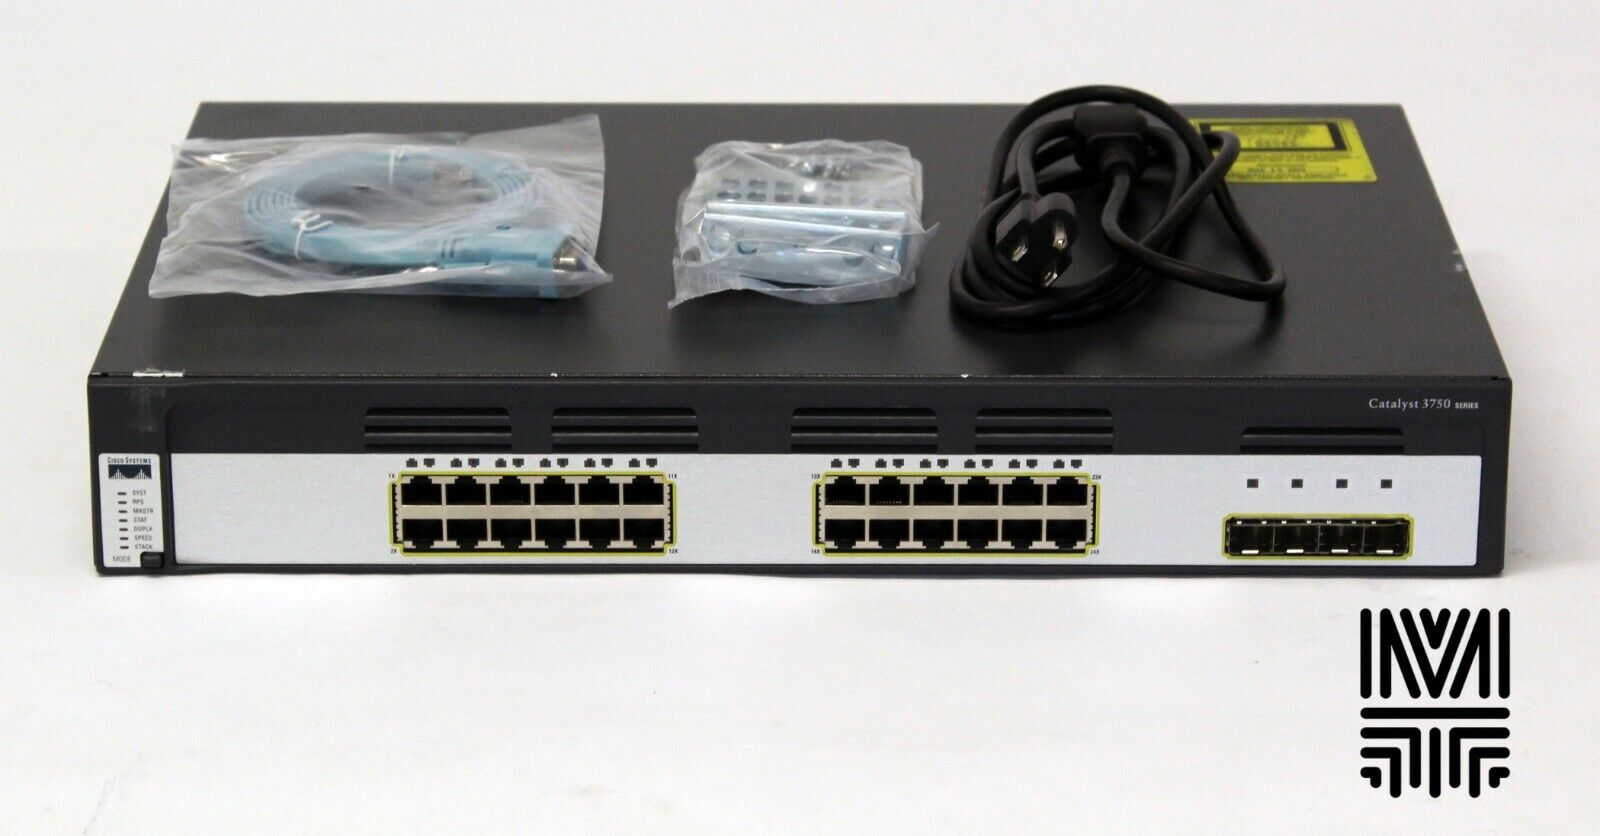 Cisco WS-C3750G-24TS-S 3750 24 Ports 10/100/1000T + IPB Image Stackable Switch